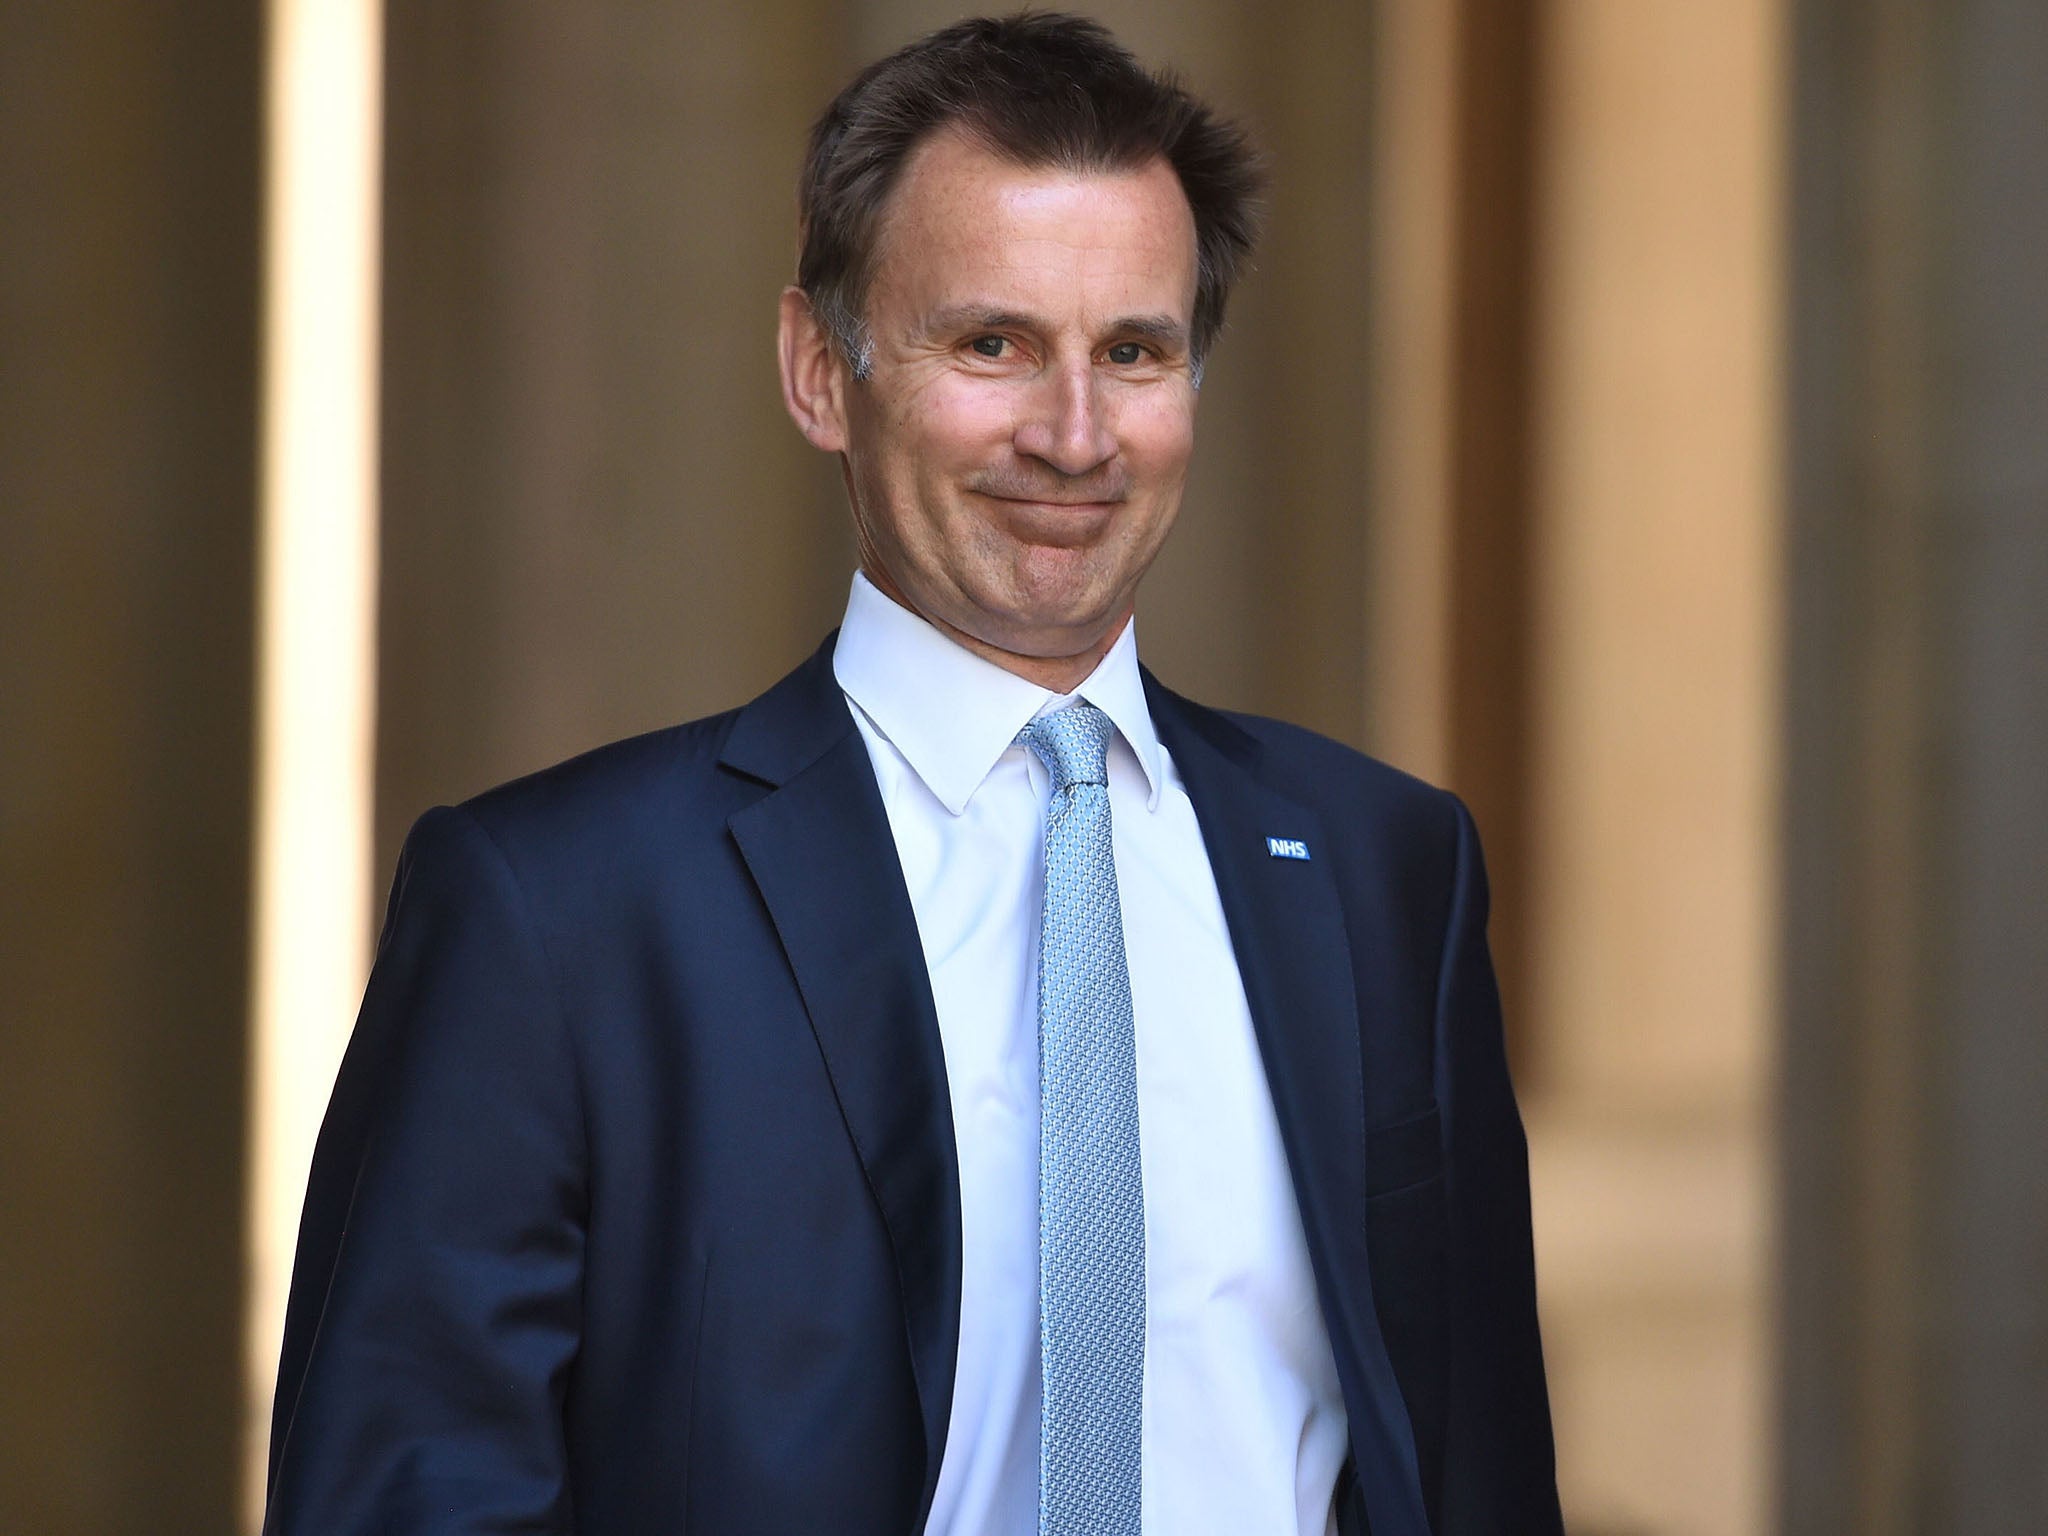 Jeremy Hunt pledged to make UK 'self-sufficient' in doctors